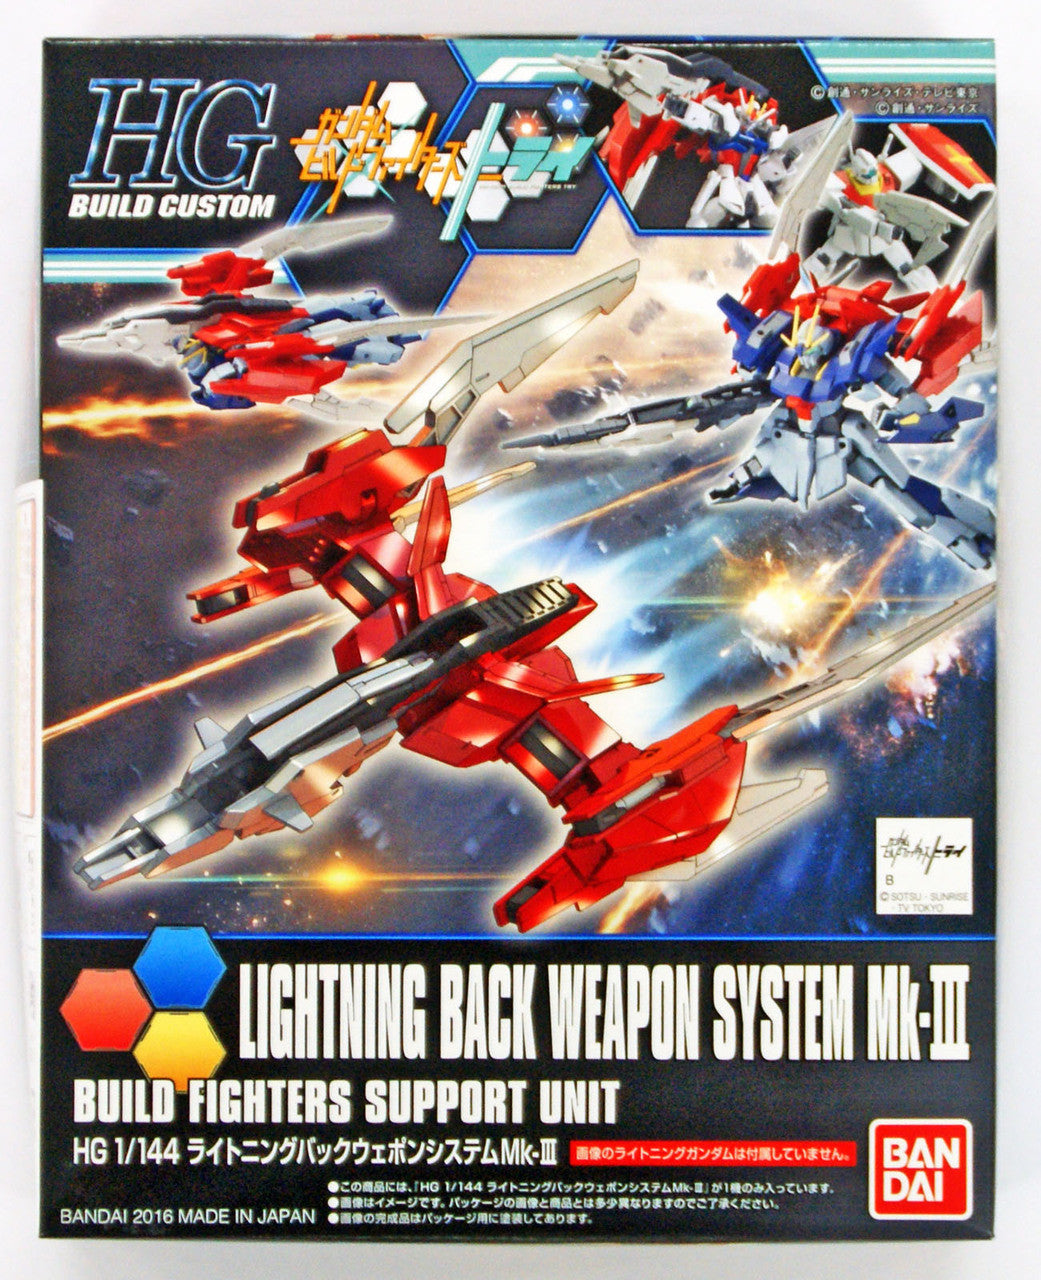 Bandai HG Build Custom Lightning Back Weapon System Mk-III Build Fighters Support Unit